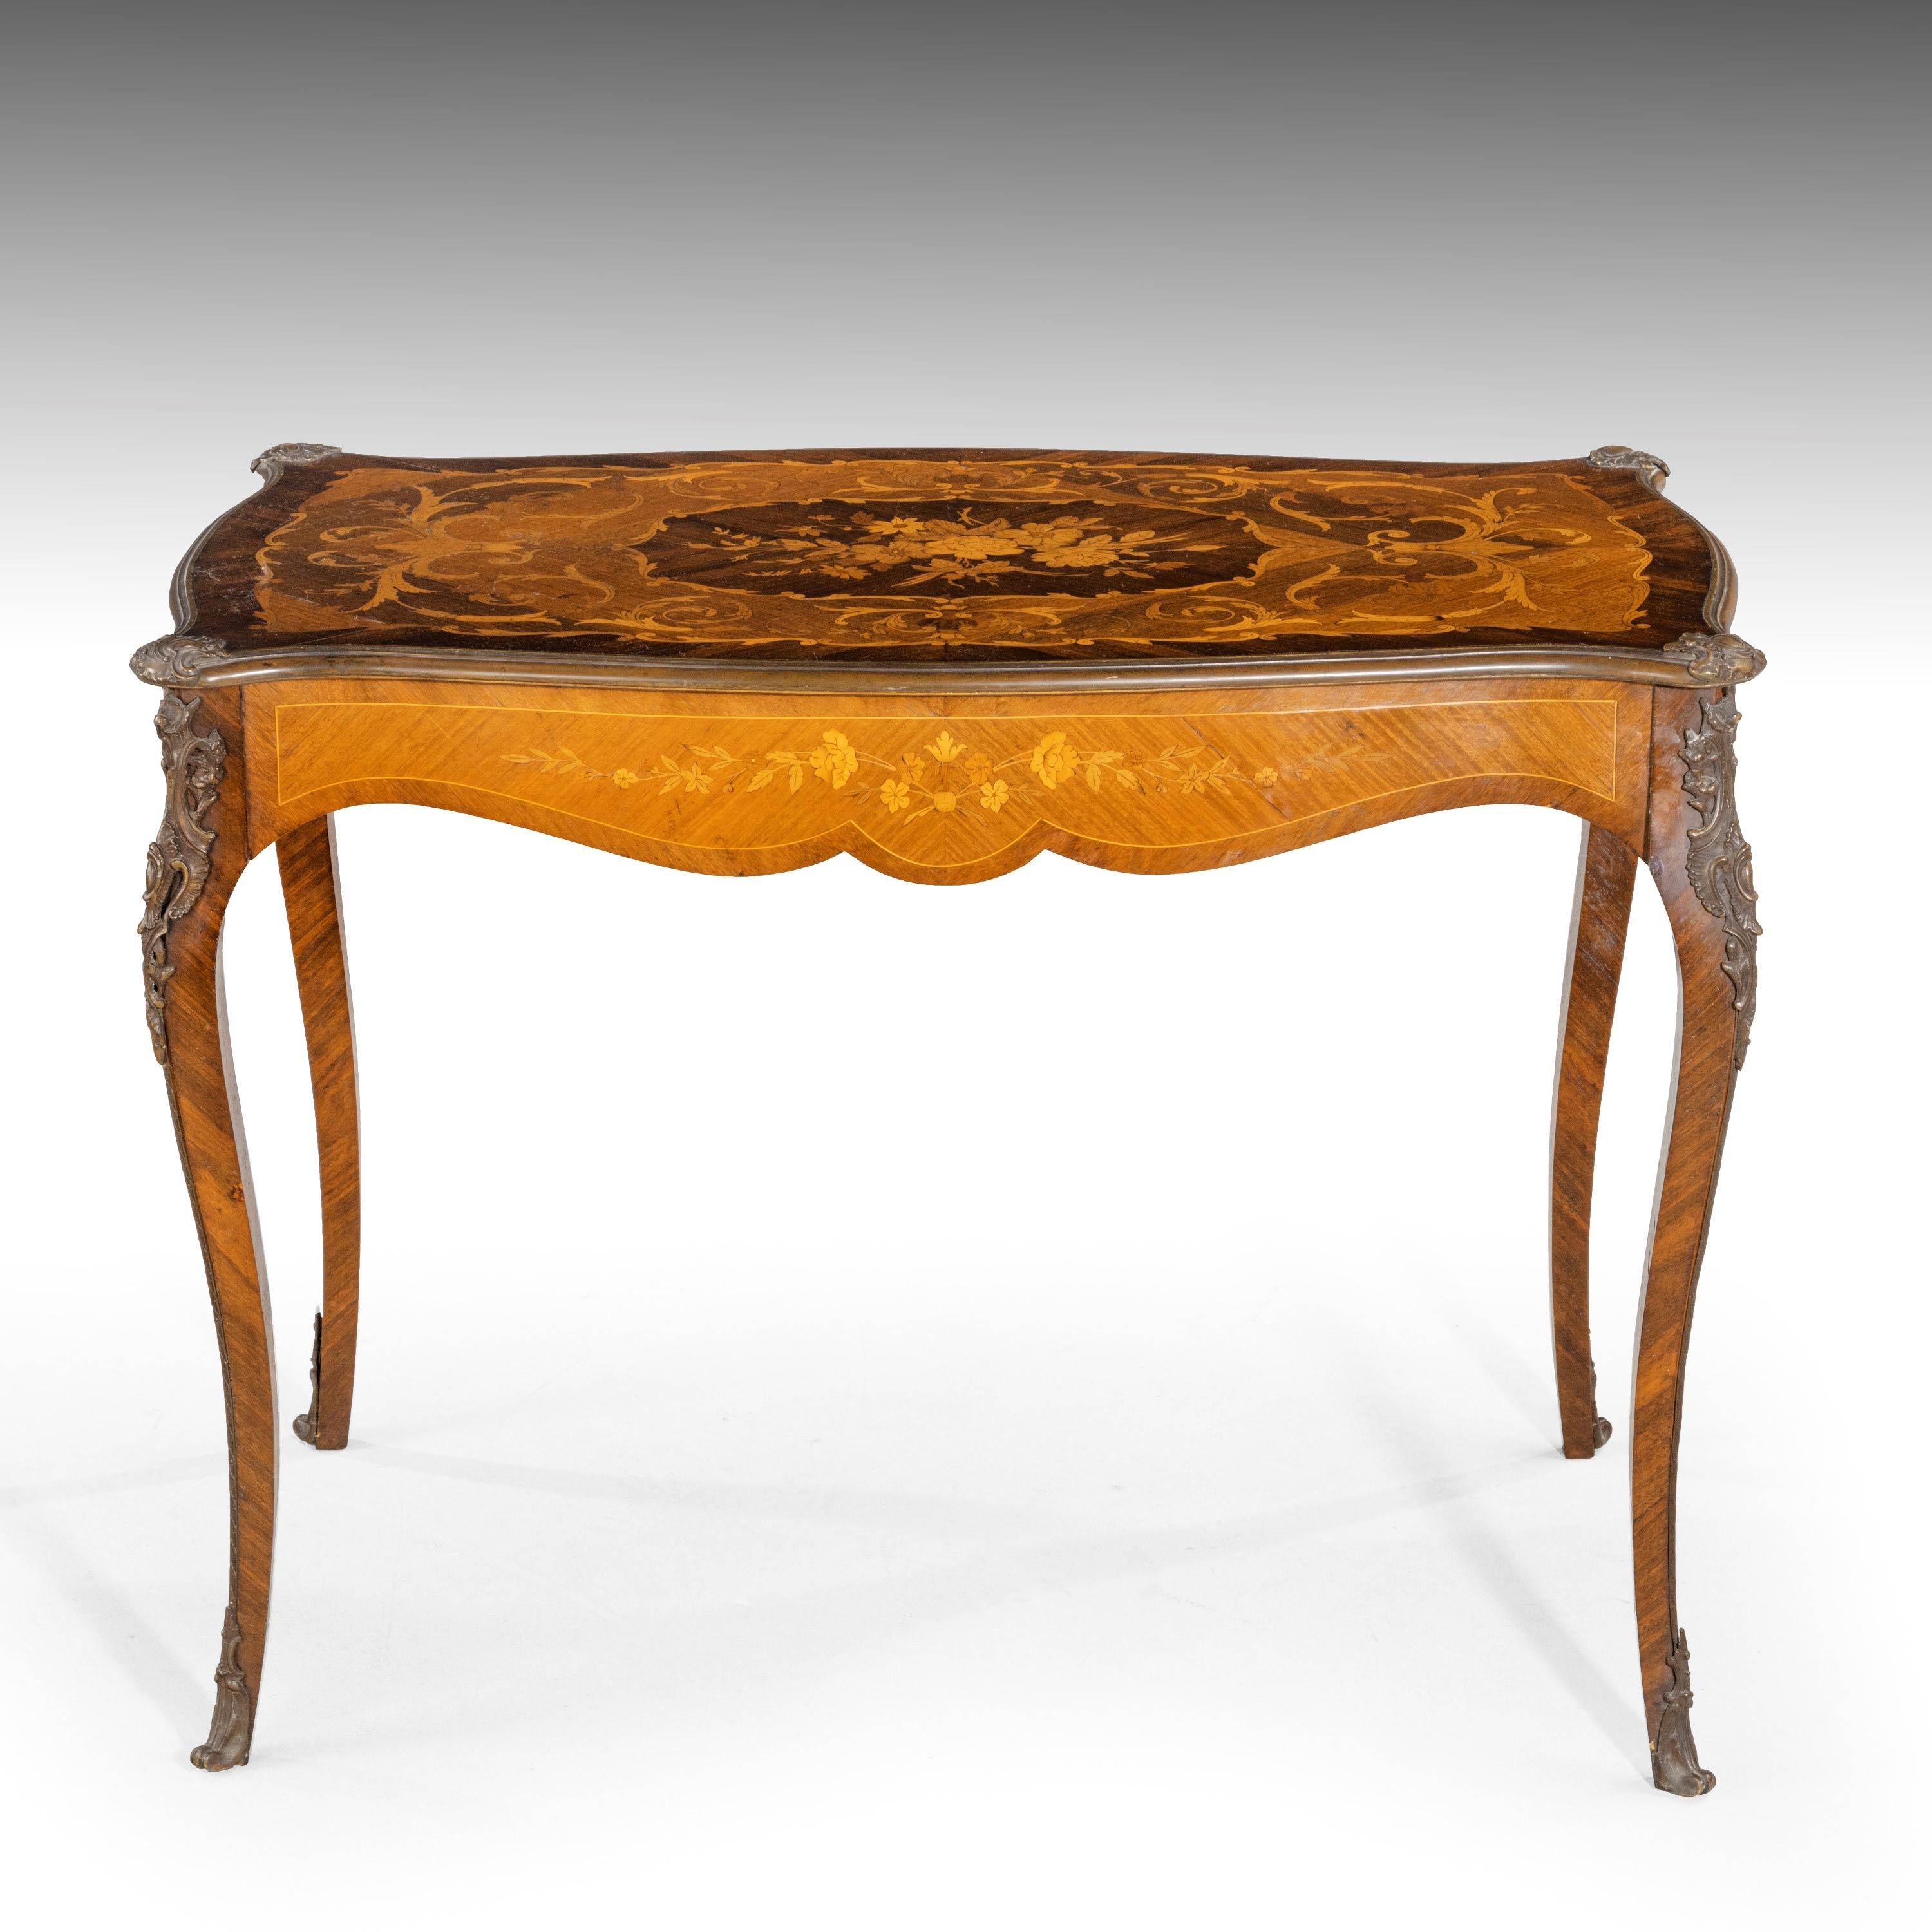 19th Century Exceptional Kingwood, Rosewood and Exotically Timbered Centre Table